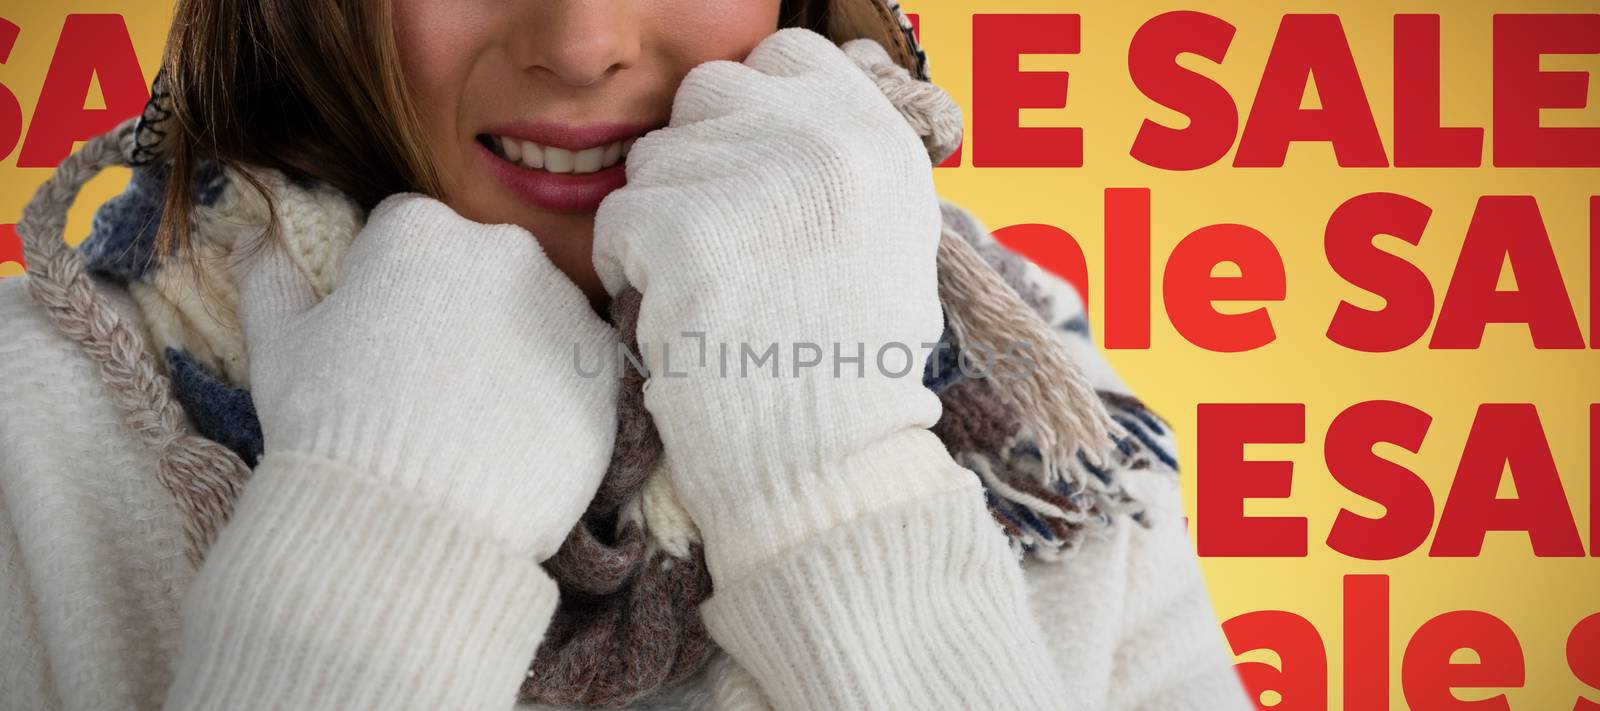 Composite image of close up portrait of smiling young woman in sweater by Wavebreakmedia